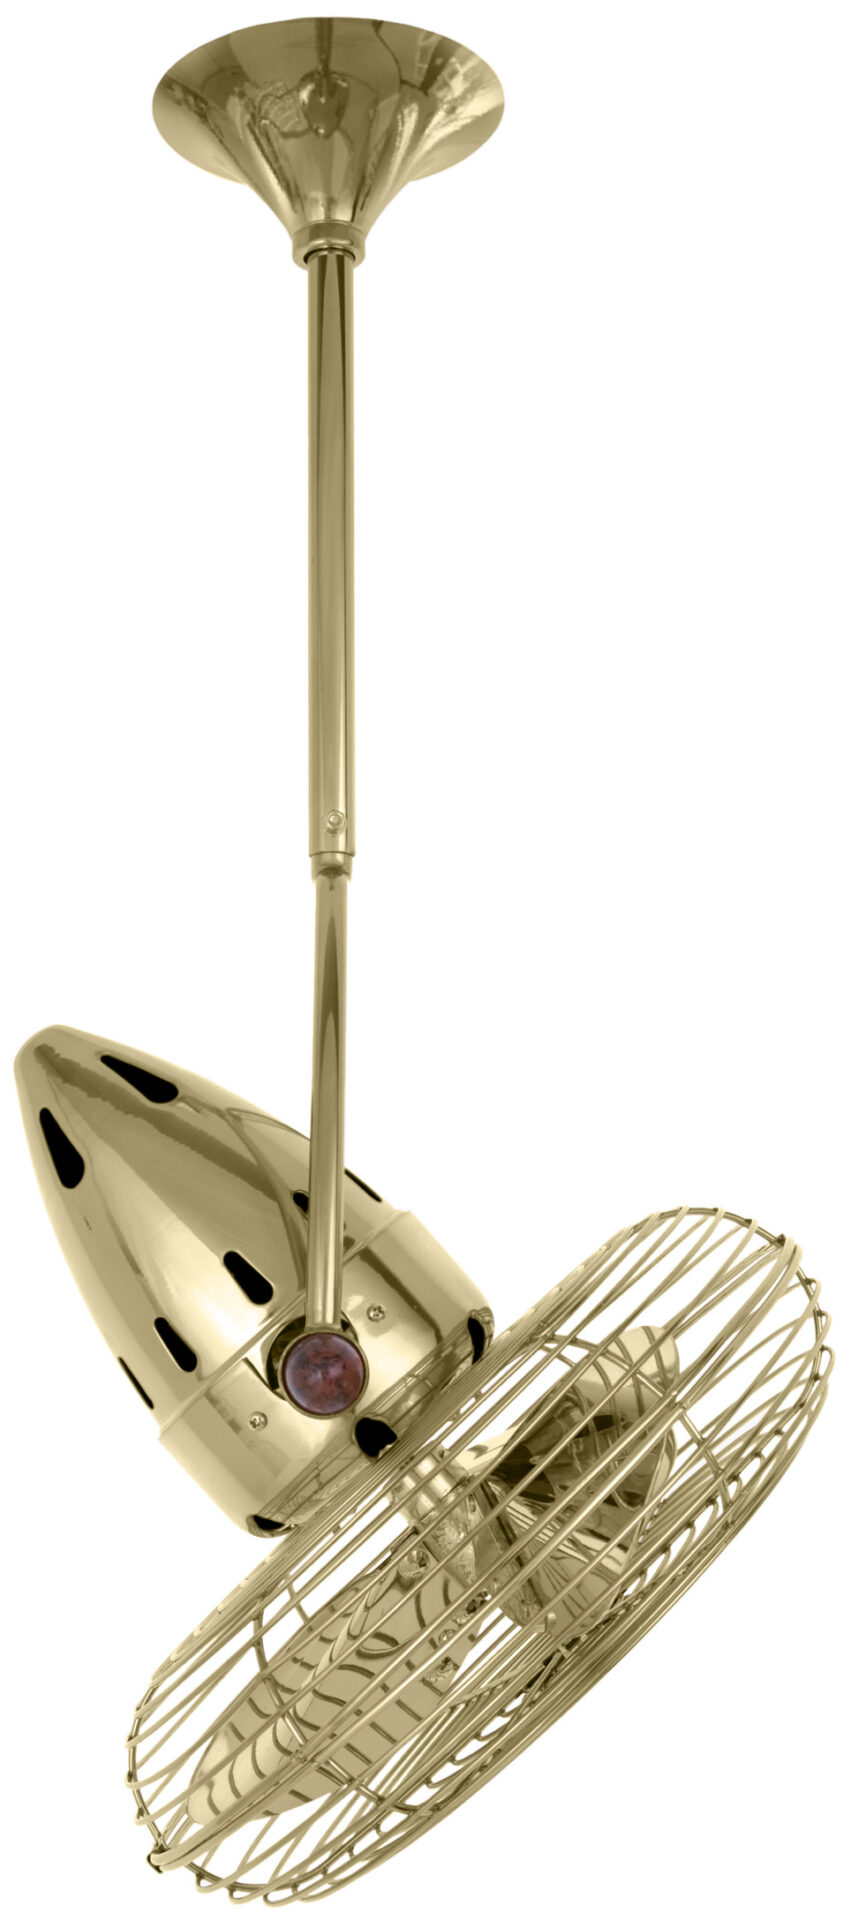 Jarold Direcional ceiling fan in Polished Brass finish with Metal blades with Decorative Guard made by Matthews Fan Company.